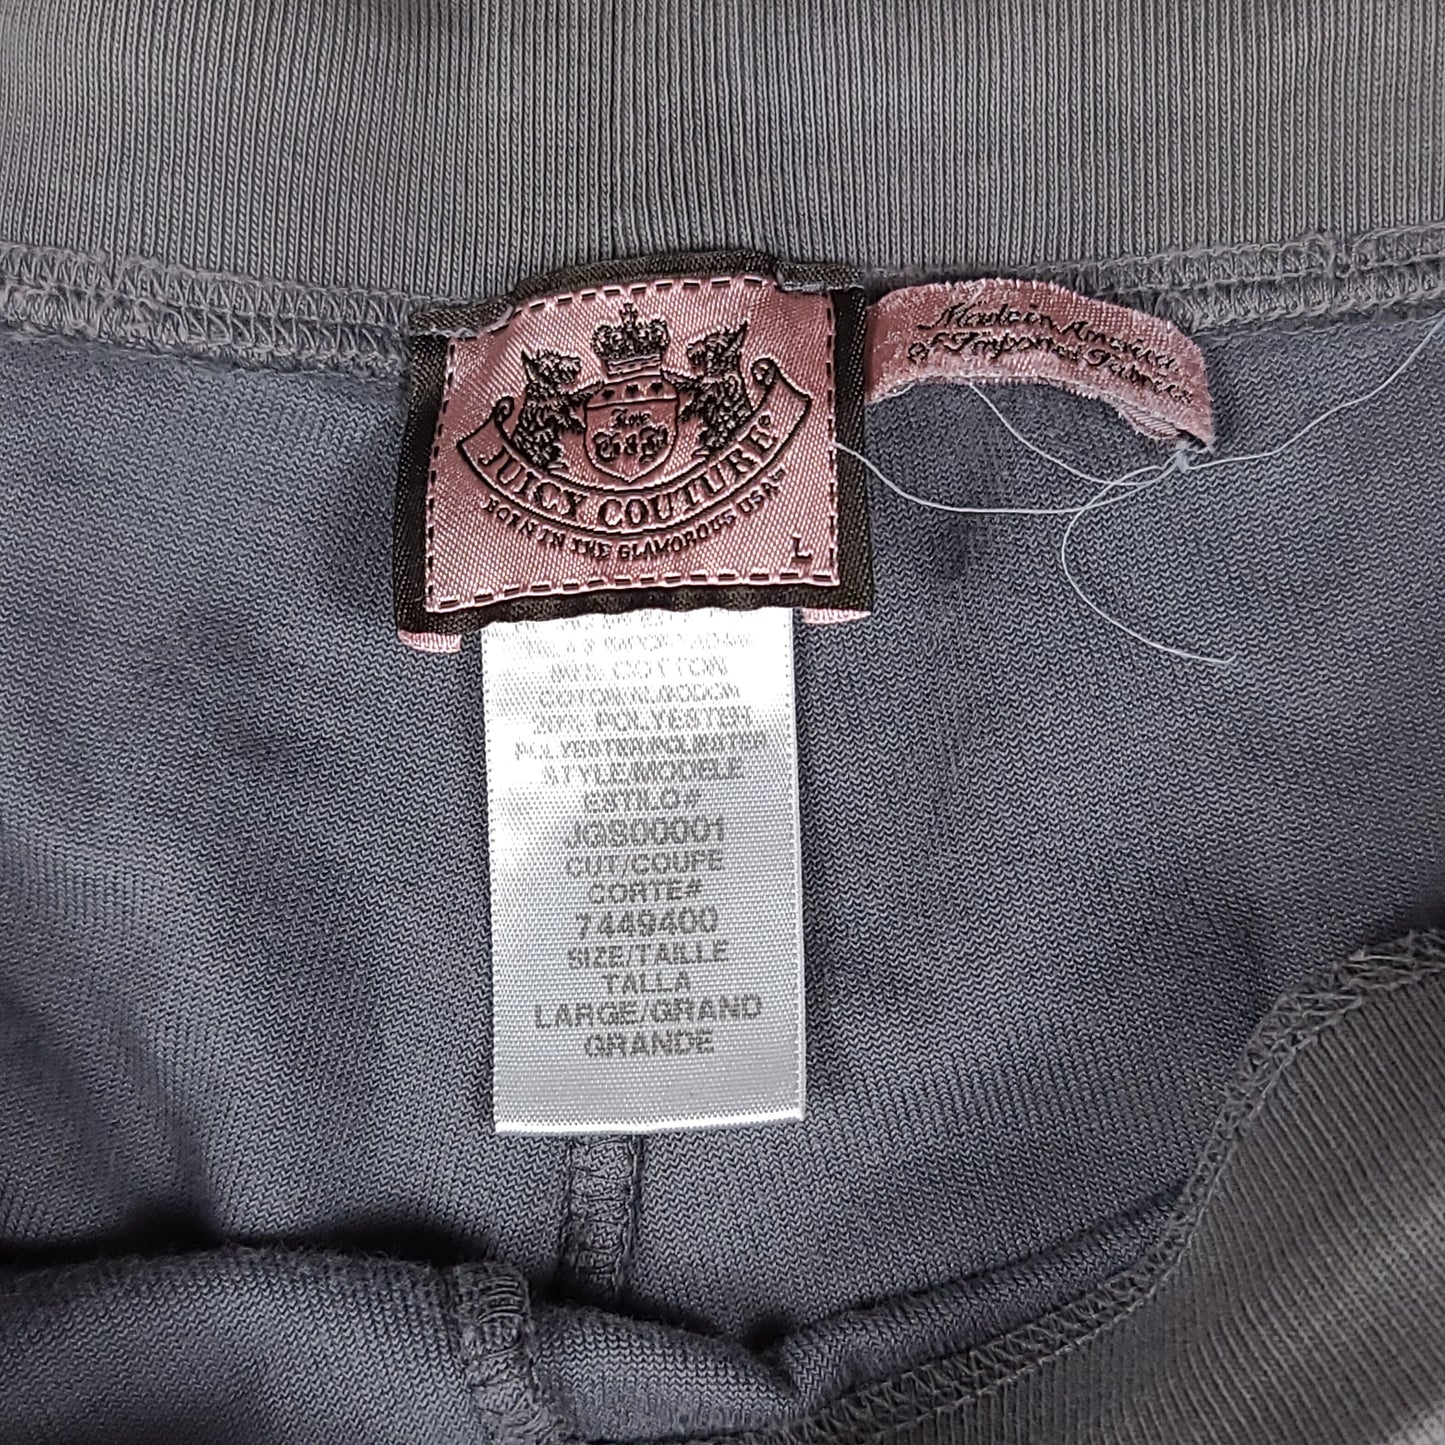 Juicy Couture Gray Sweatpants